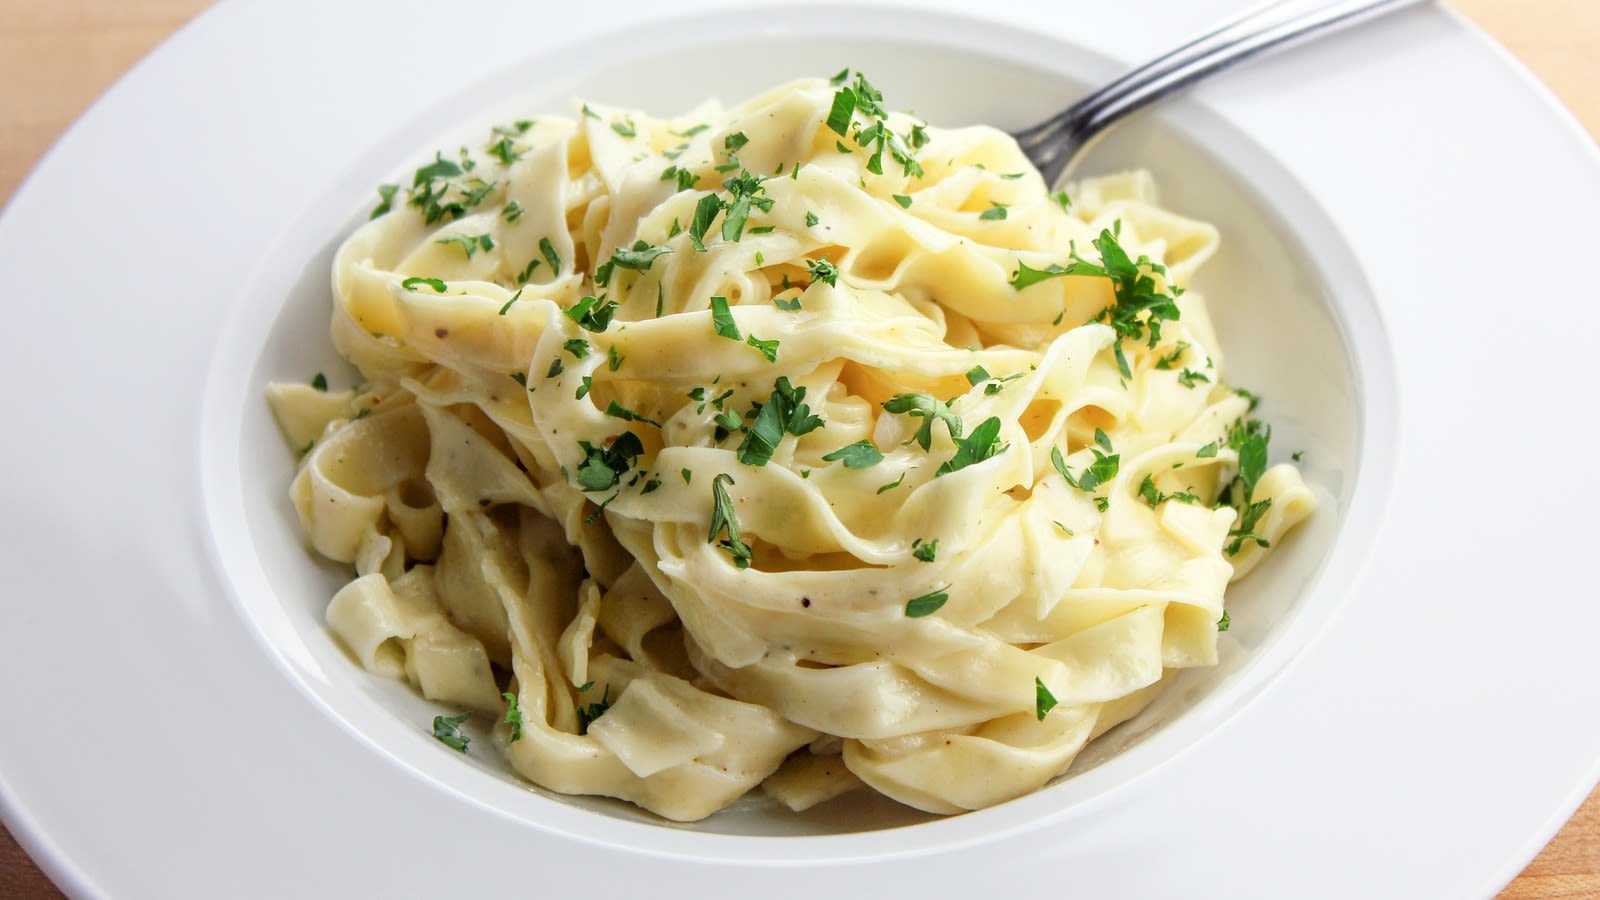 For The Creamiest Alfredo Sauce Ever, Look To Your Bowl First